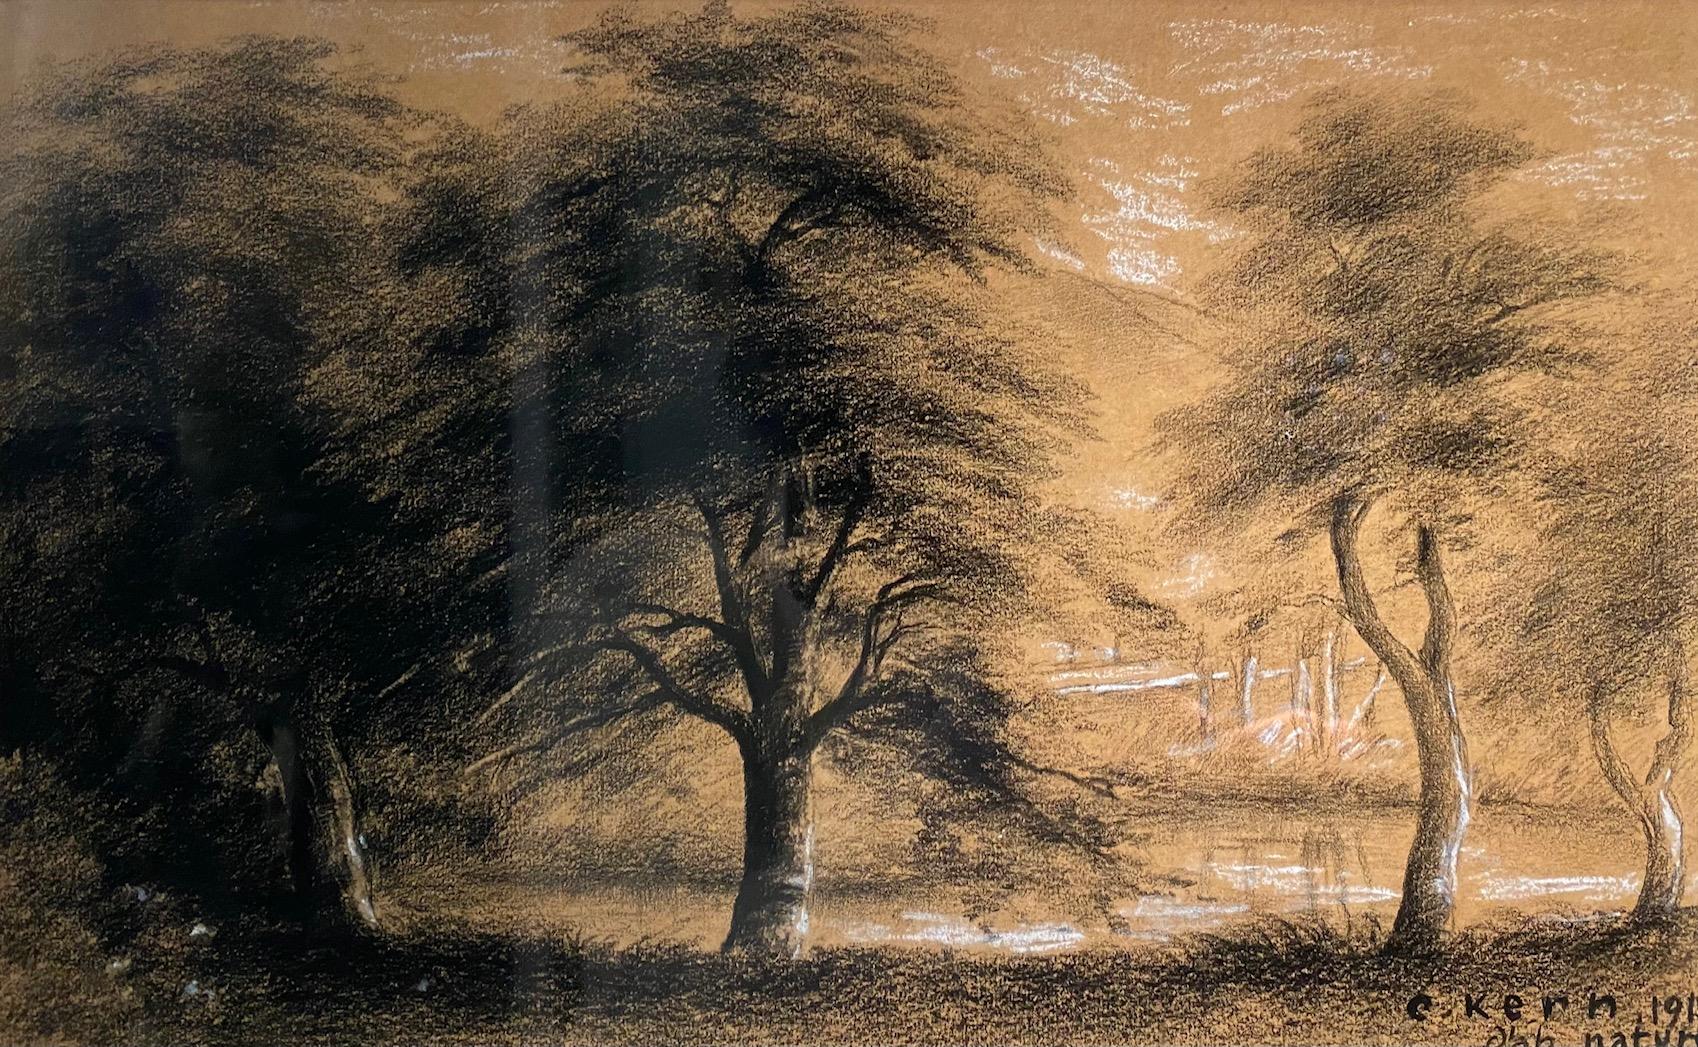 Nature by Charles Kern Fiedler - Pastels on paper 30x40 cm